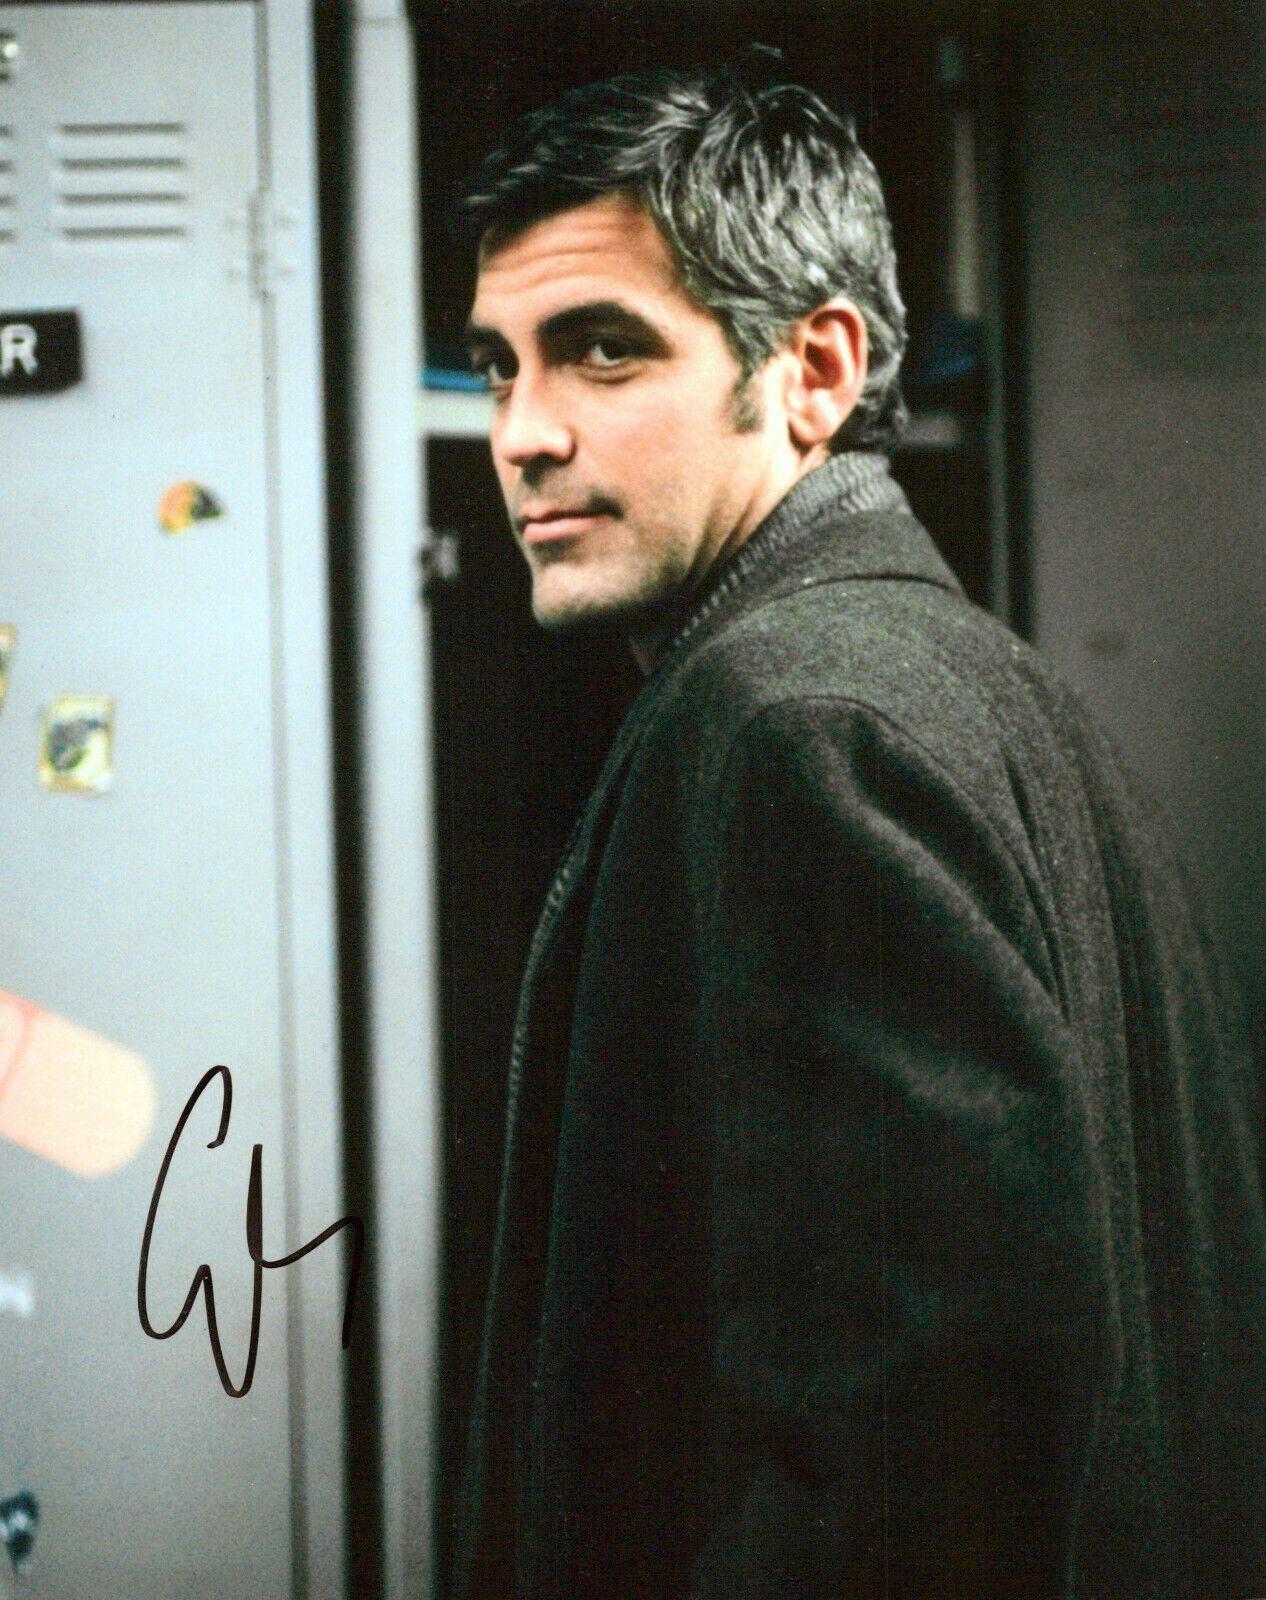 George Clooney One Fine Day autographed Photo Poster painting signed 8x10 #3 Jack Taylor